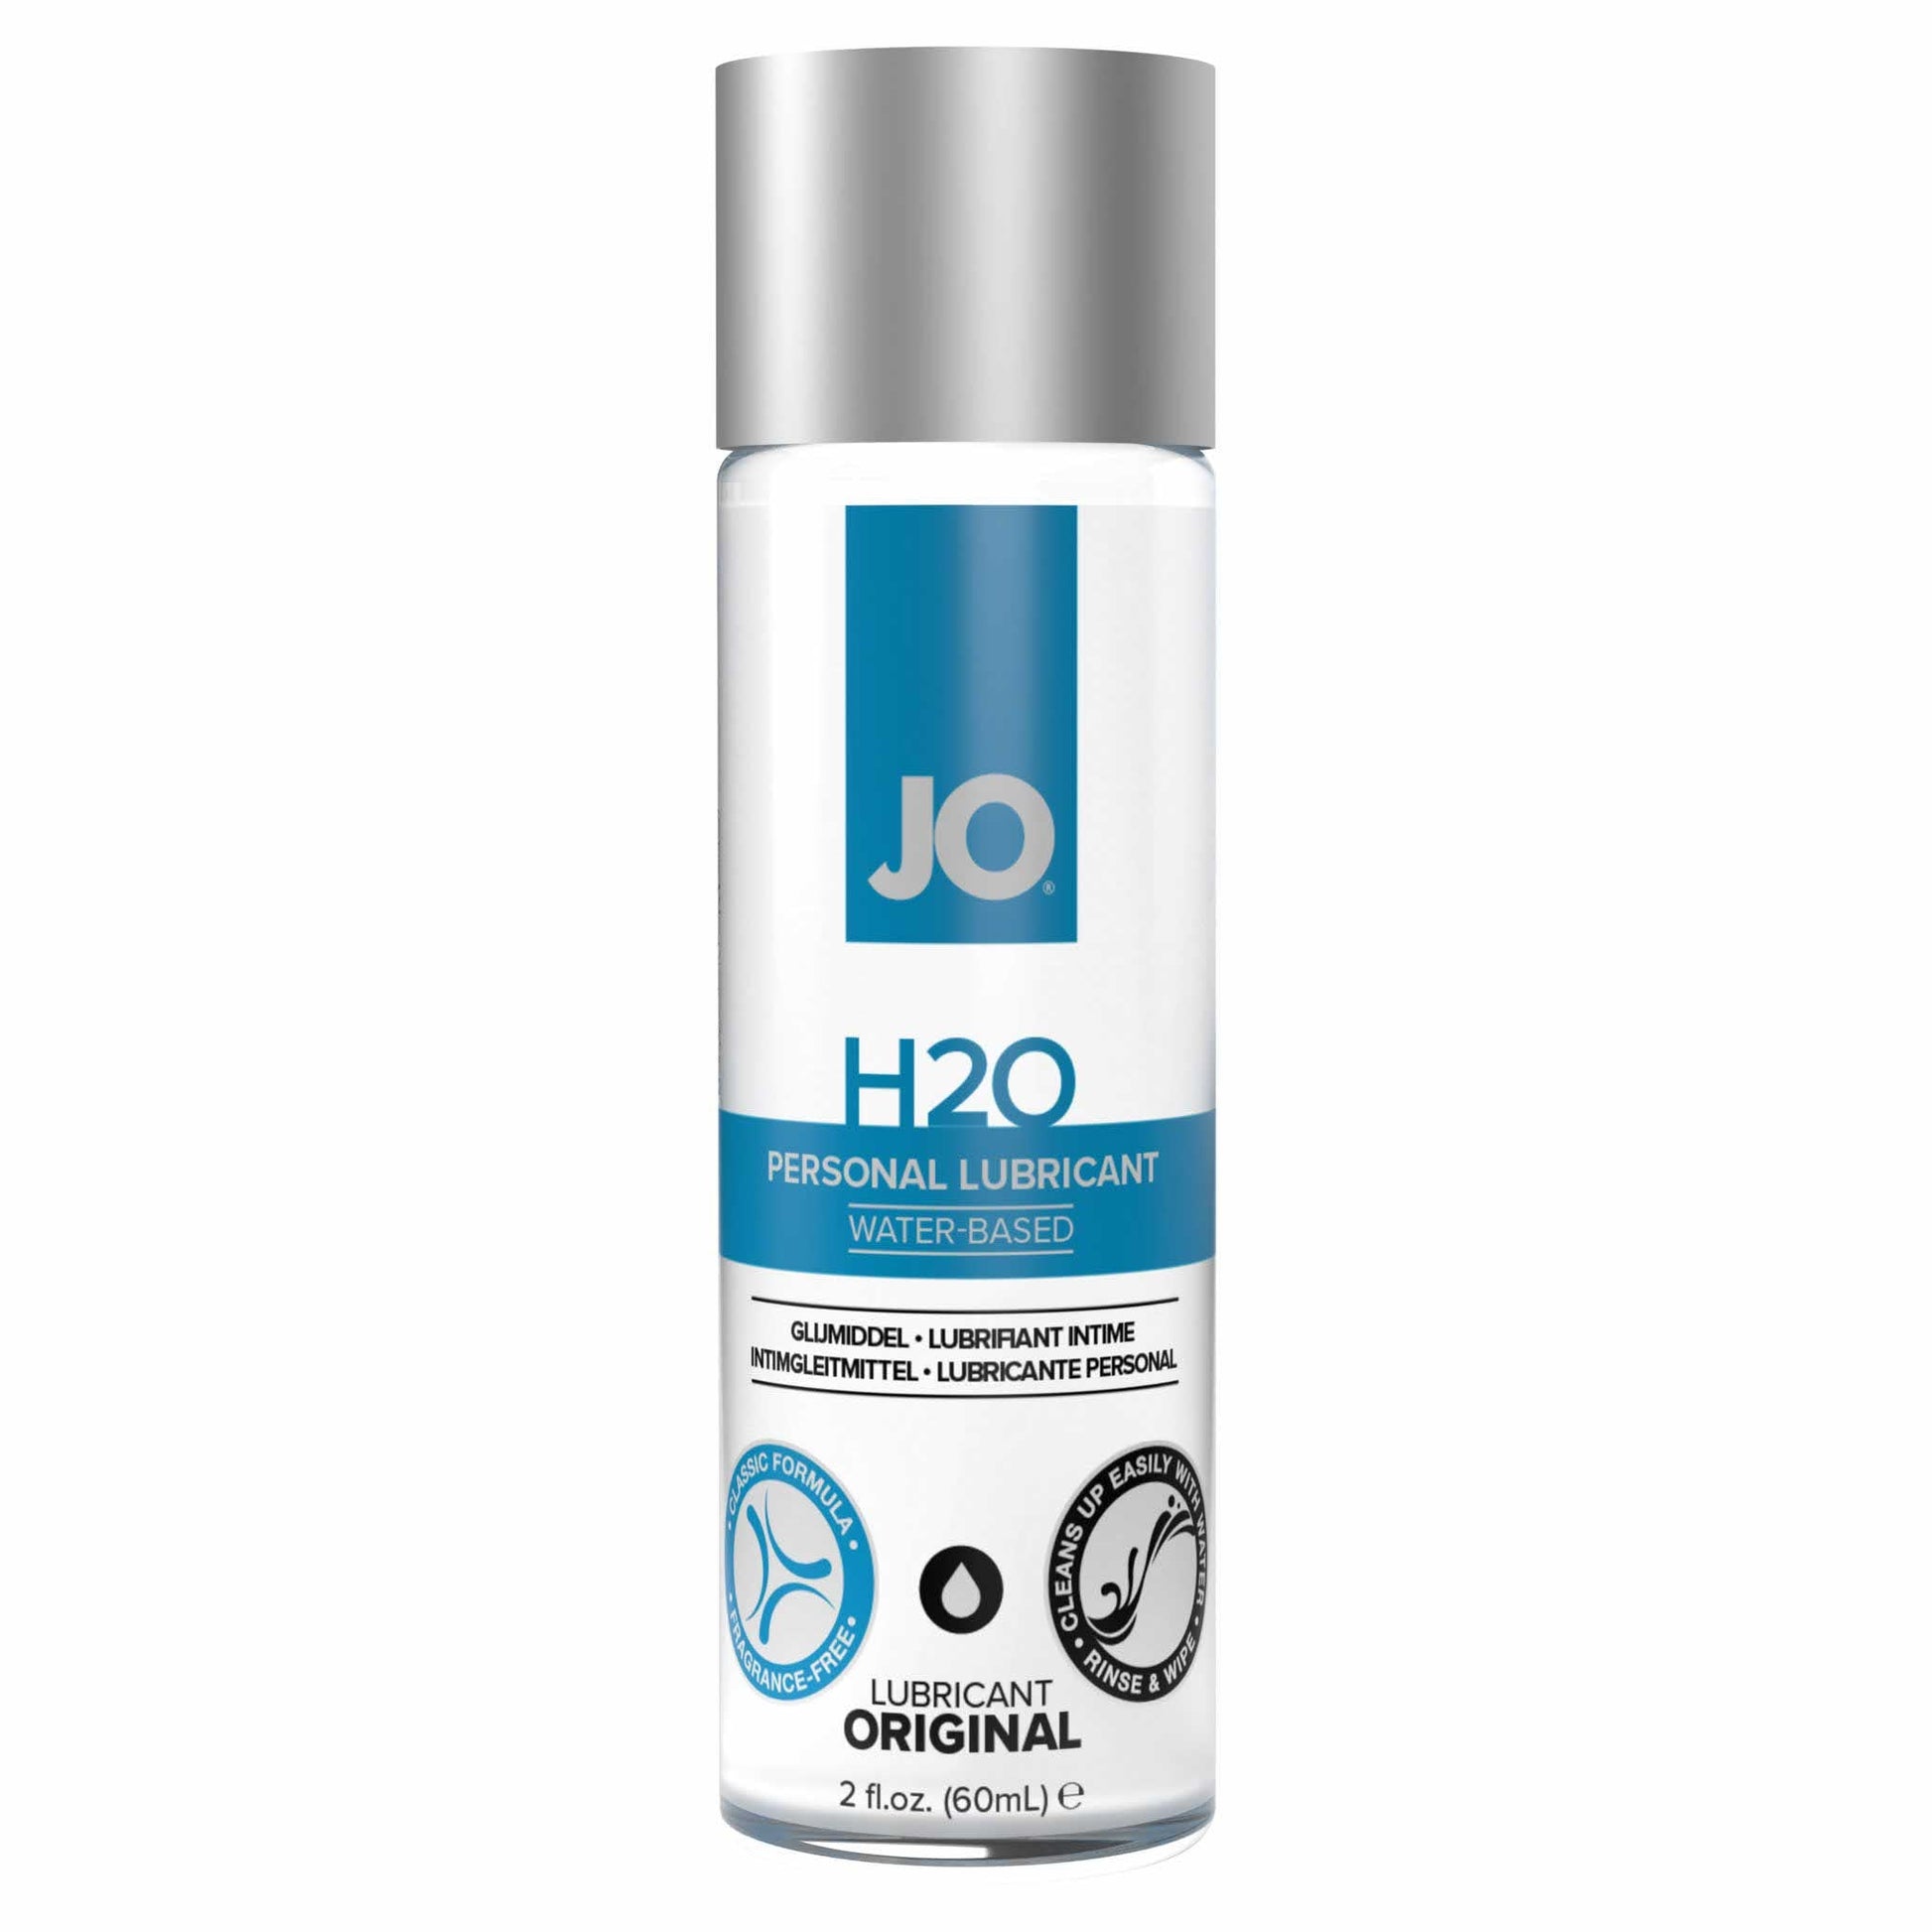 front view of the jo h2o classic personal water-based lubricant original 2oz